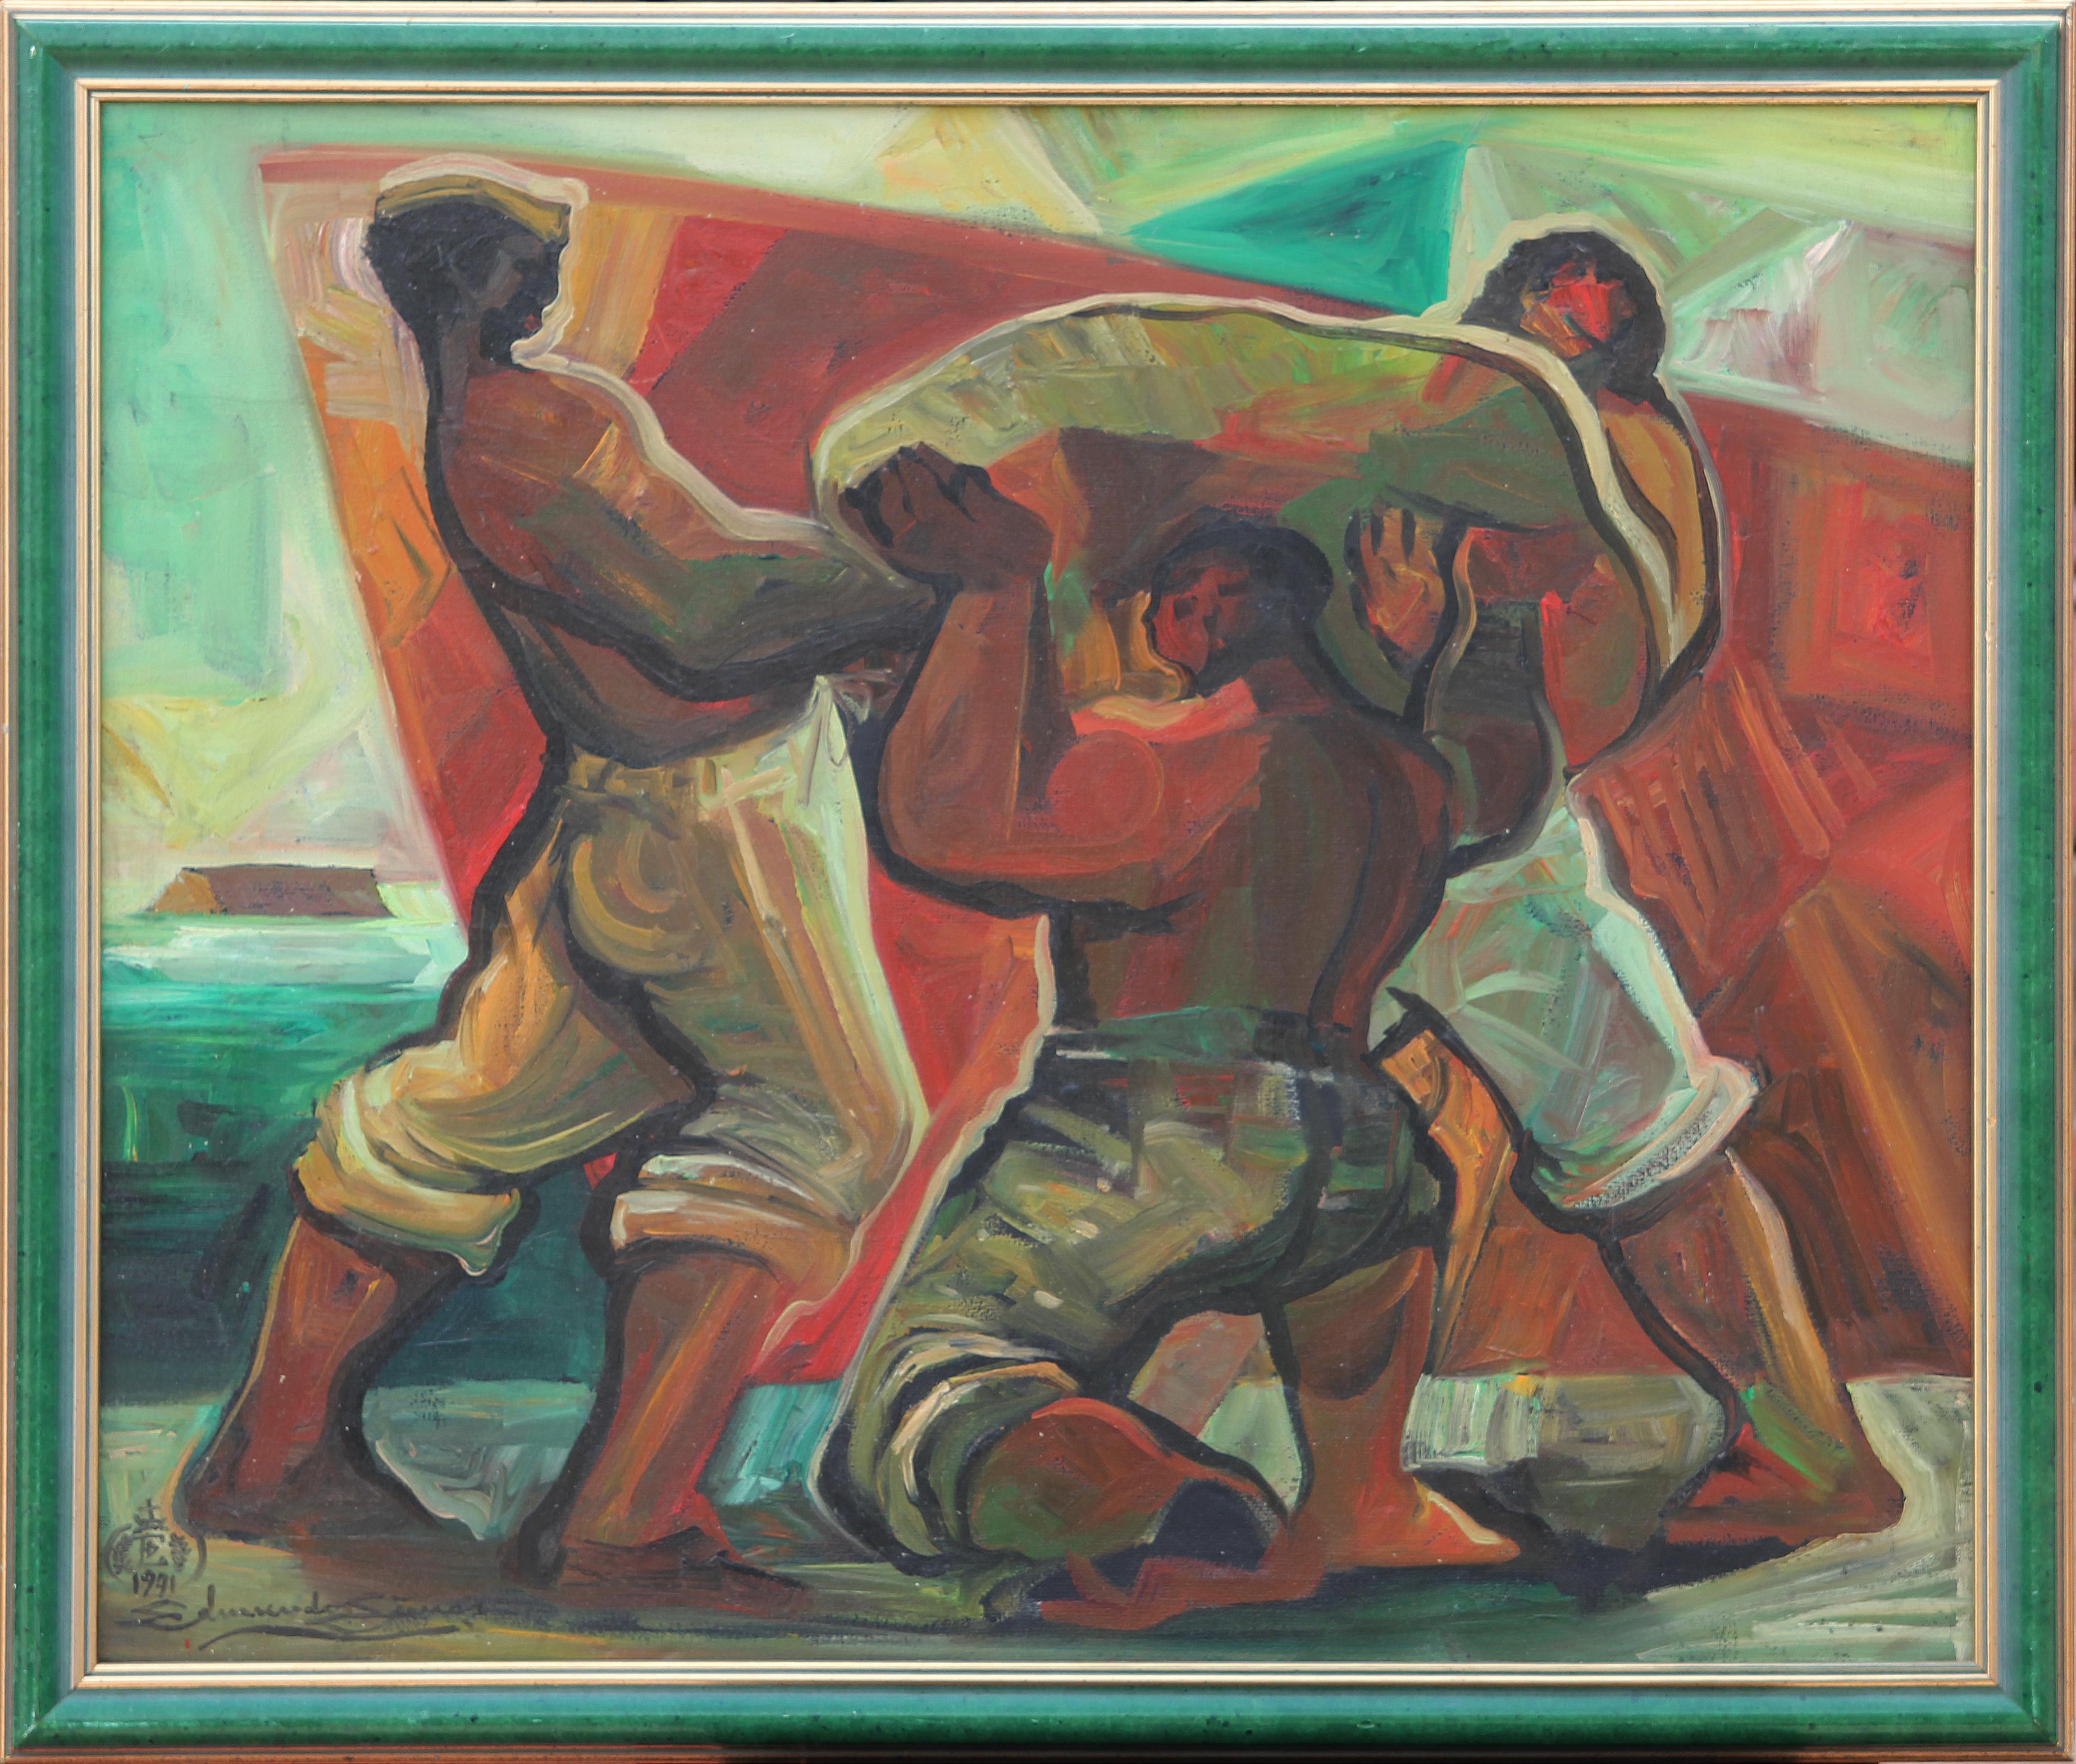 Edmundo Sinas Figurative Painting - Modern Abstract American WPA Ashcan School Inspired Painting of Dock Workers